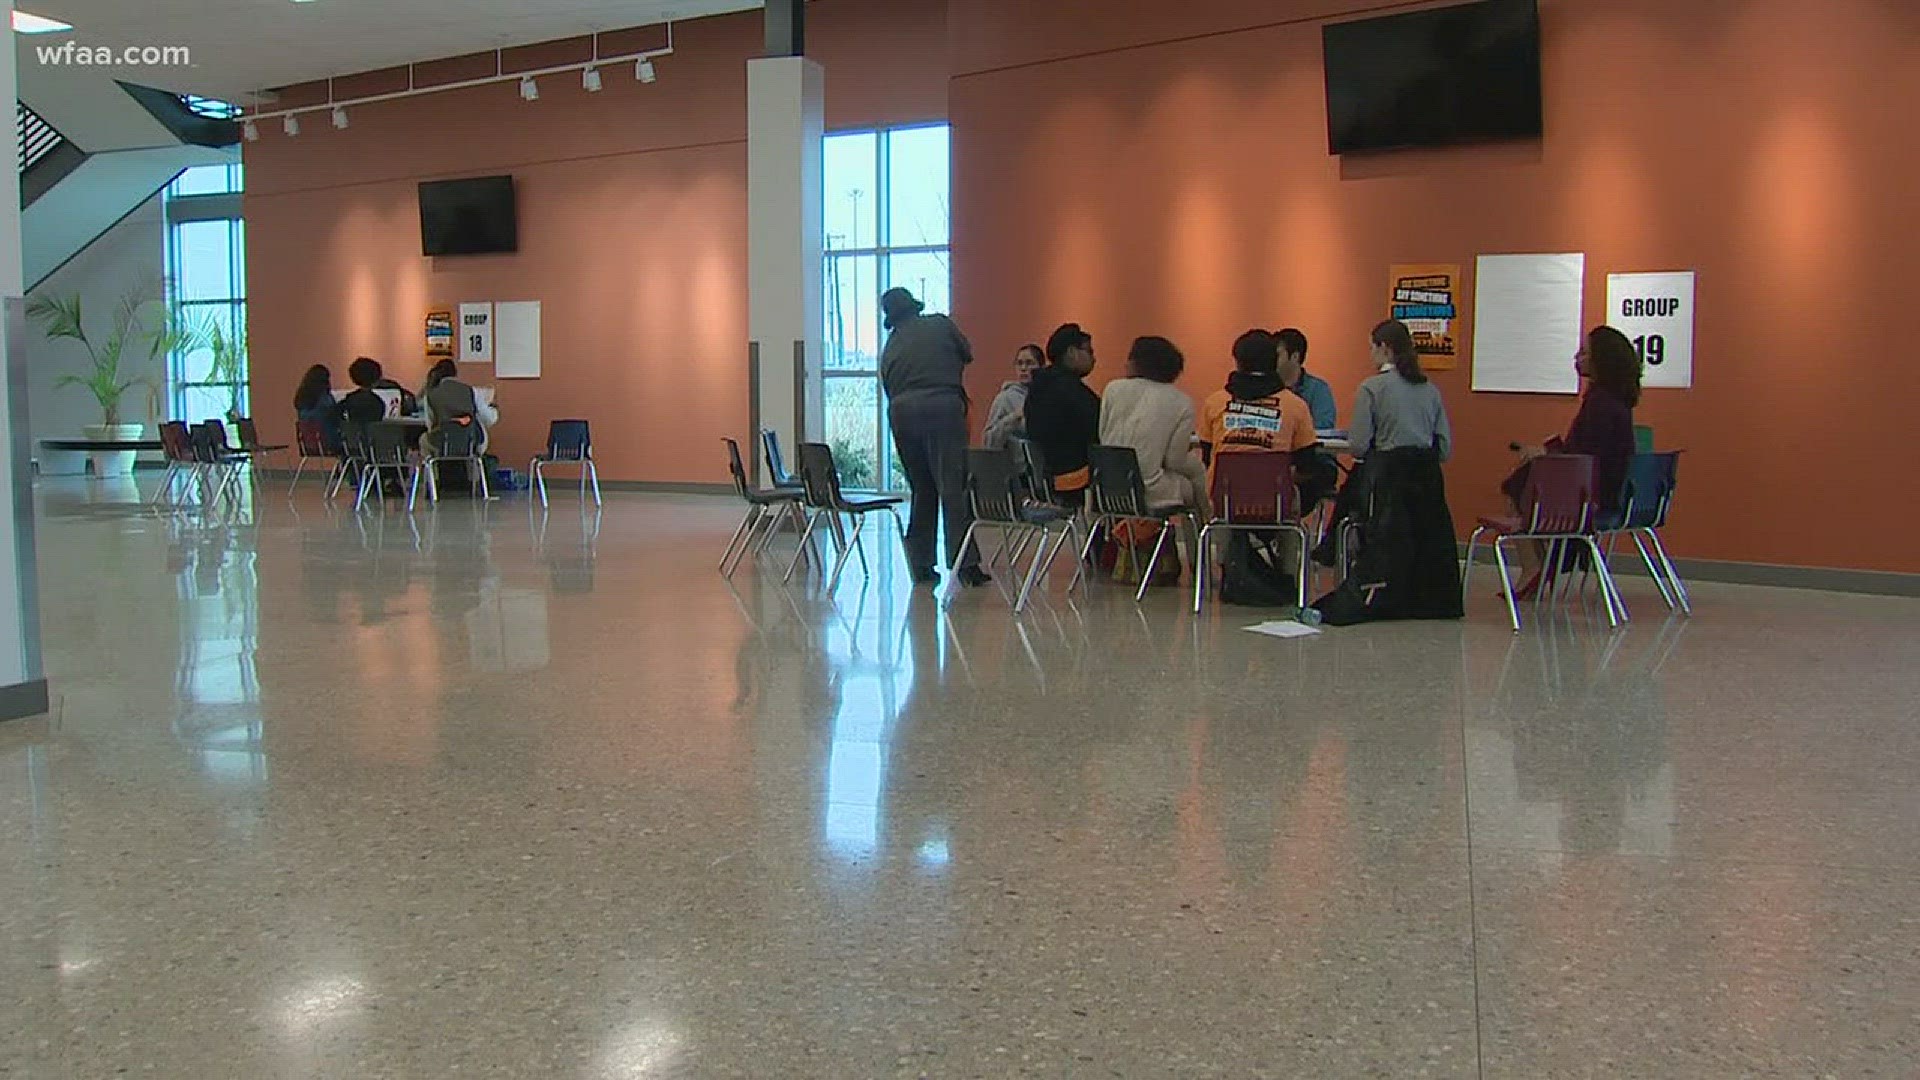 Dallas ISD students gave their thoughts on preventing gun violence across the school district.